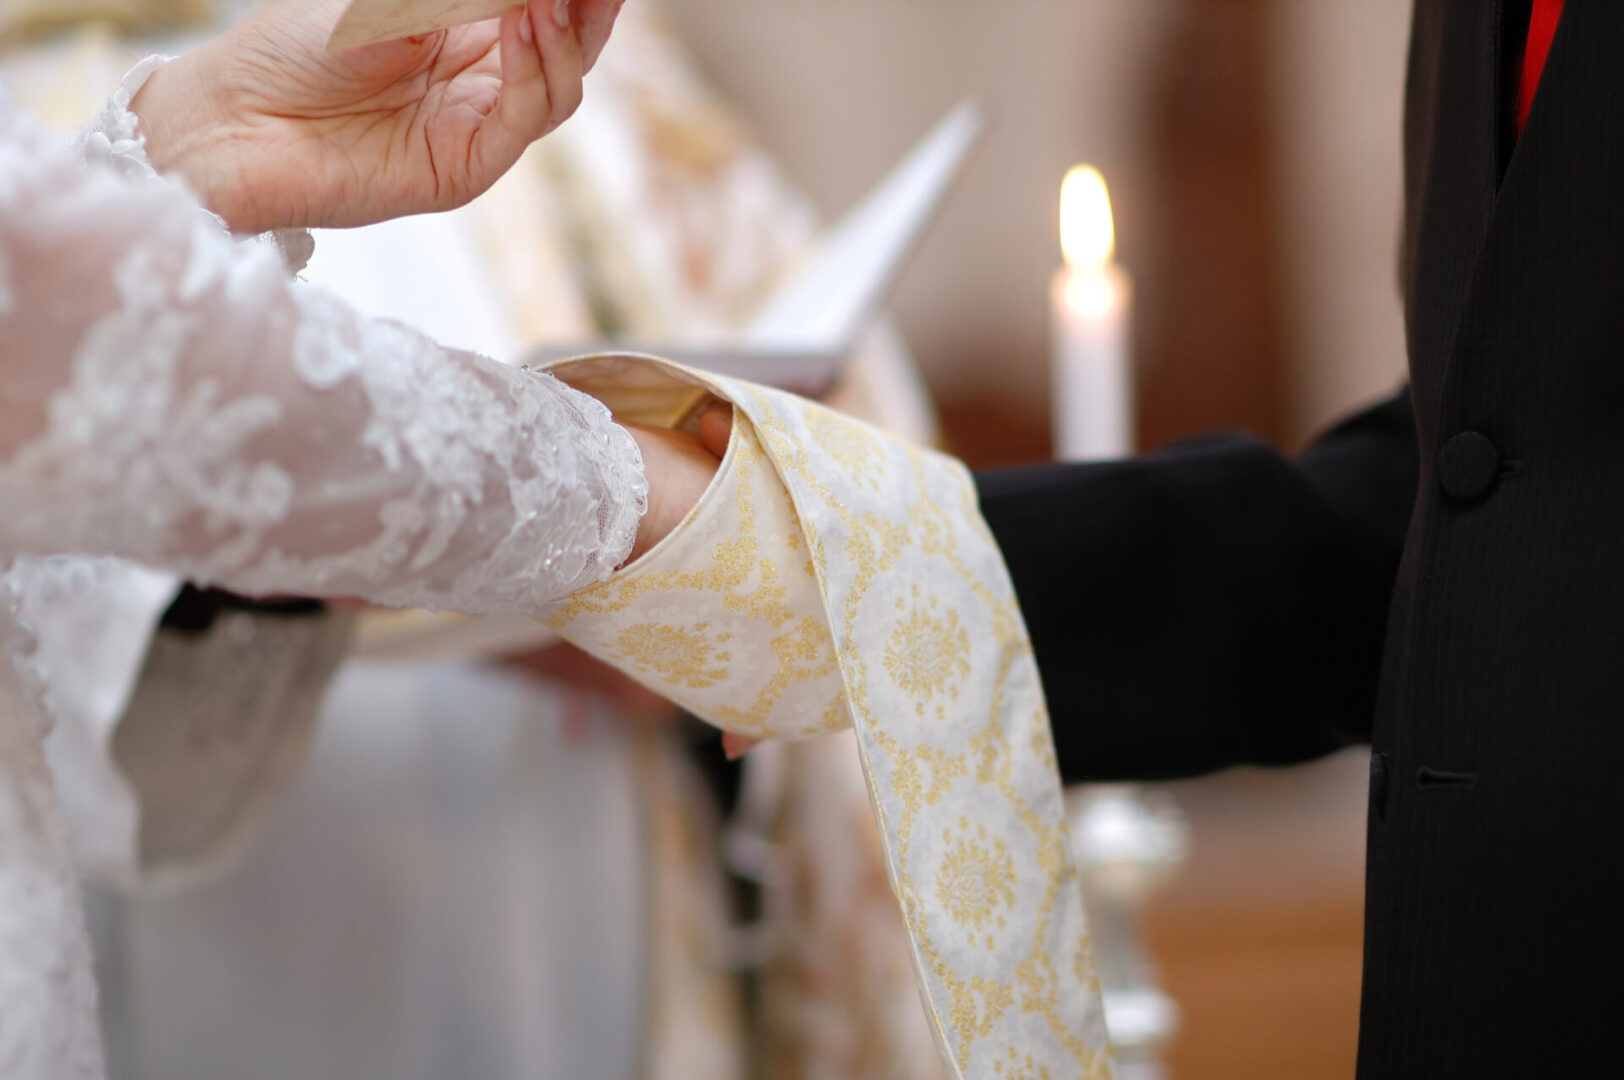 Wedding: bride and groom's hands wrapped in priest's cassock